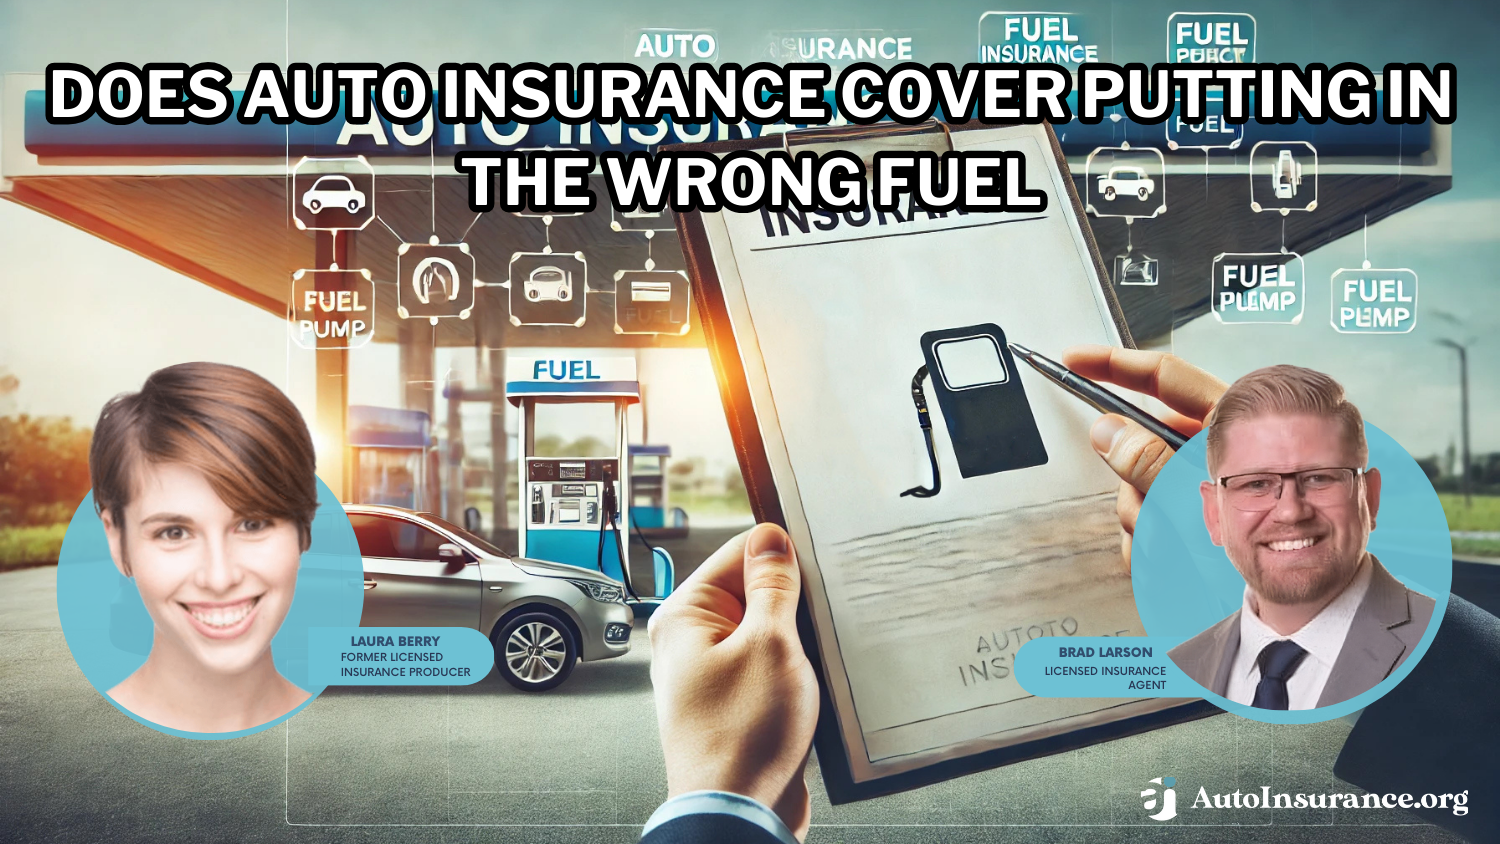 Does auto insurance cover putting in the wrong fuel?